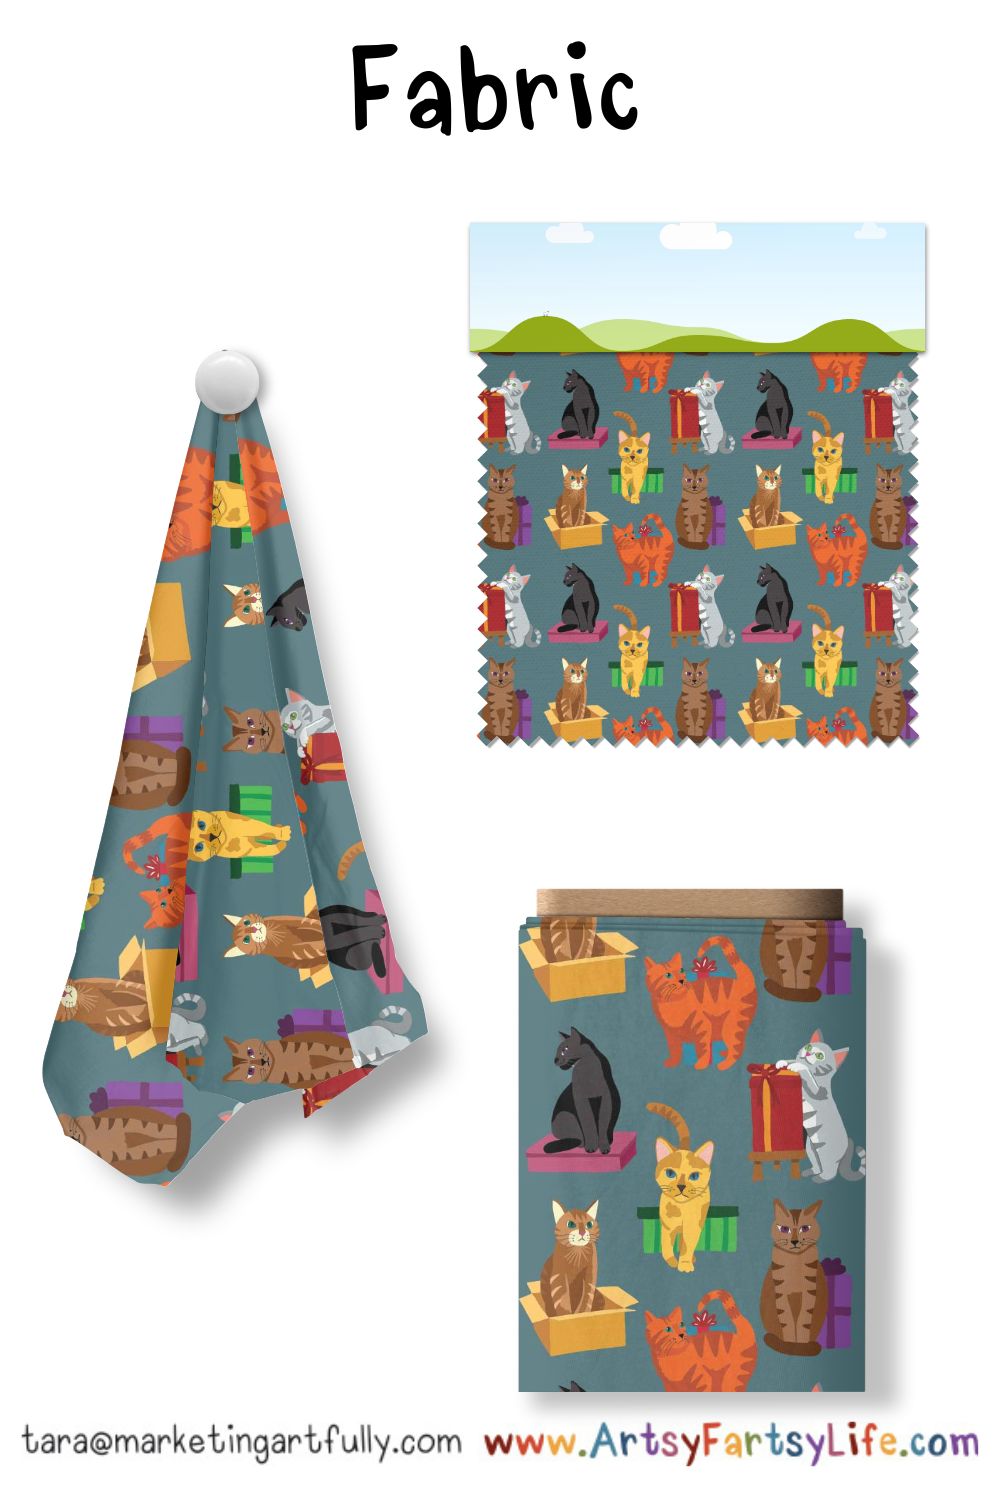 Everyday Cats 1 Surface Design For Gift Wrap and Party Paper